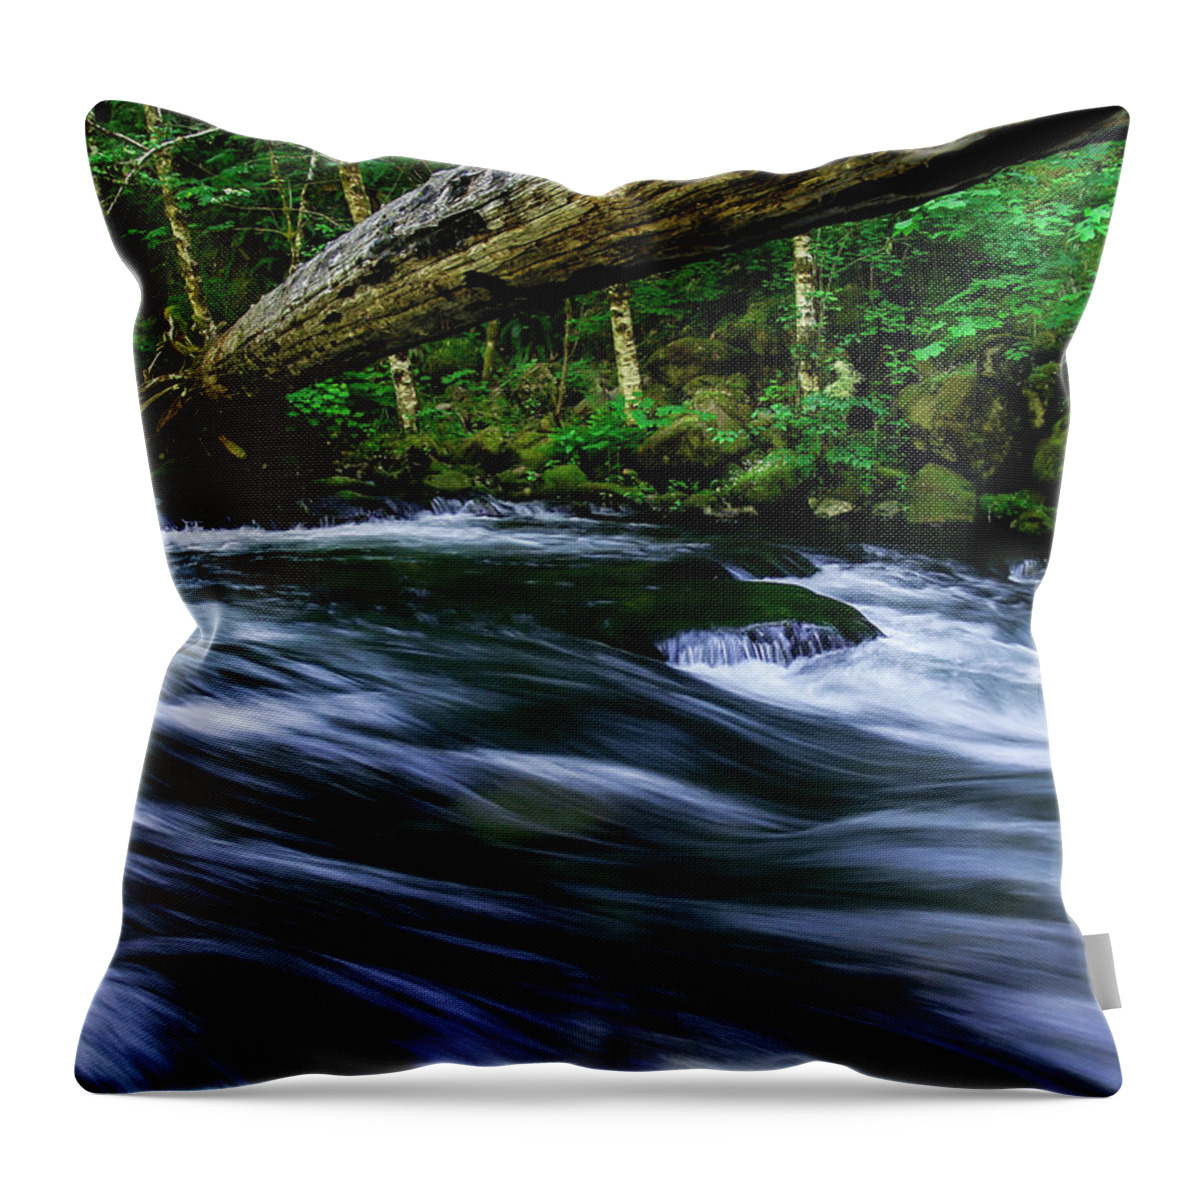 Landscapes Throw Pillow featuring the photograph Eagle Creek Rapids by Steven Clark